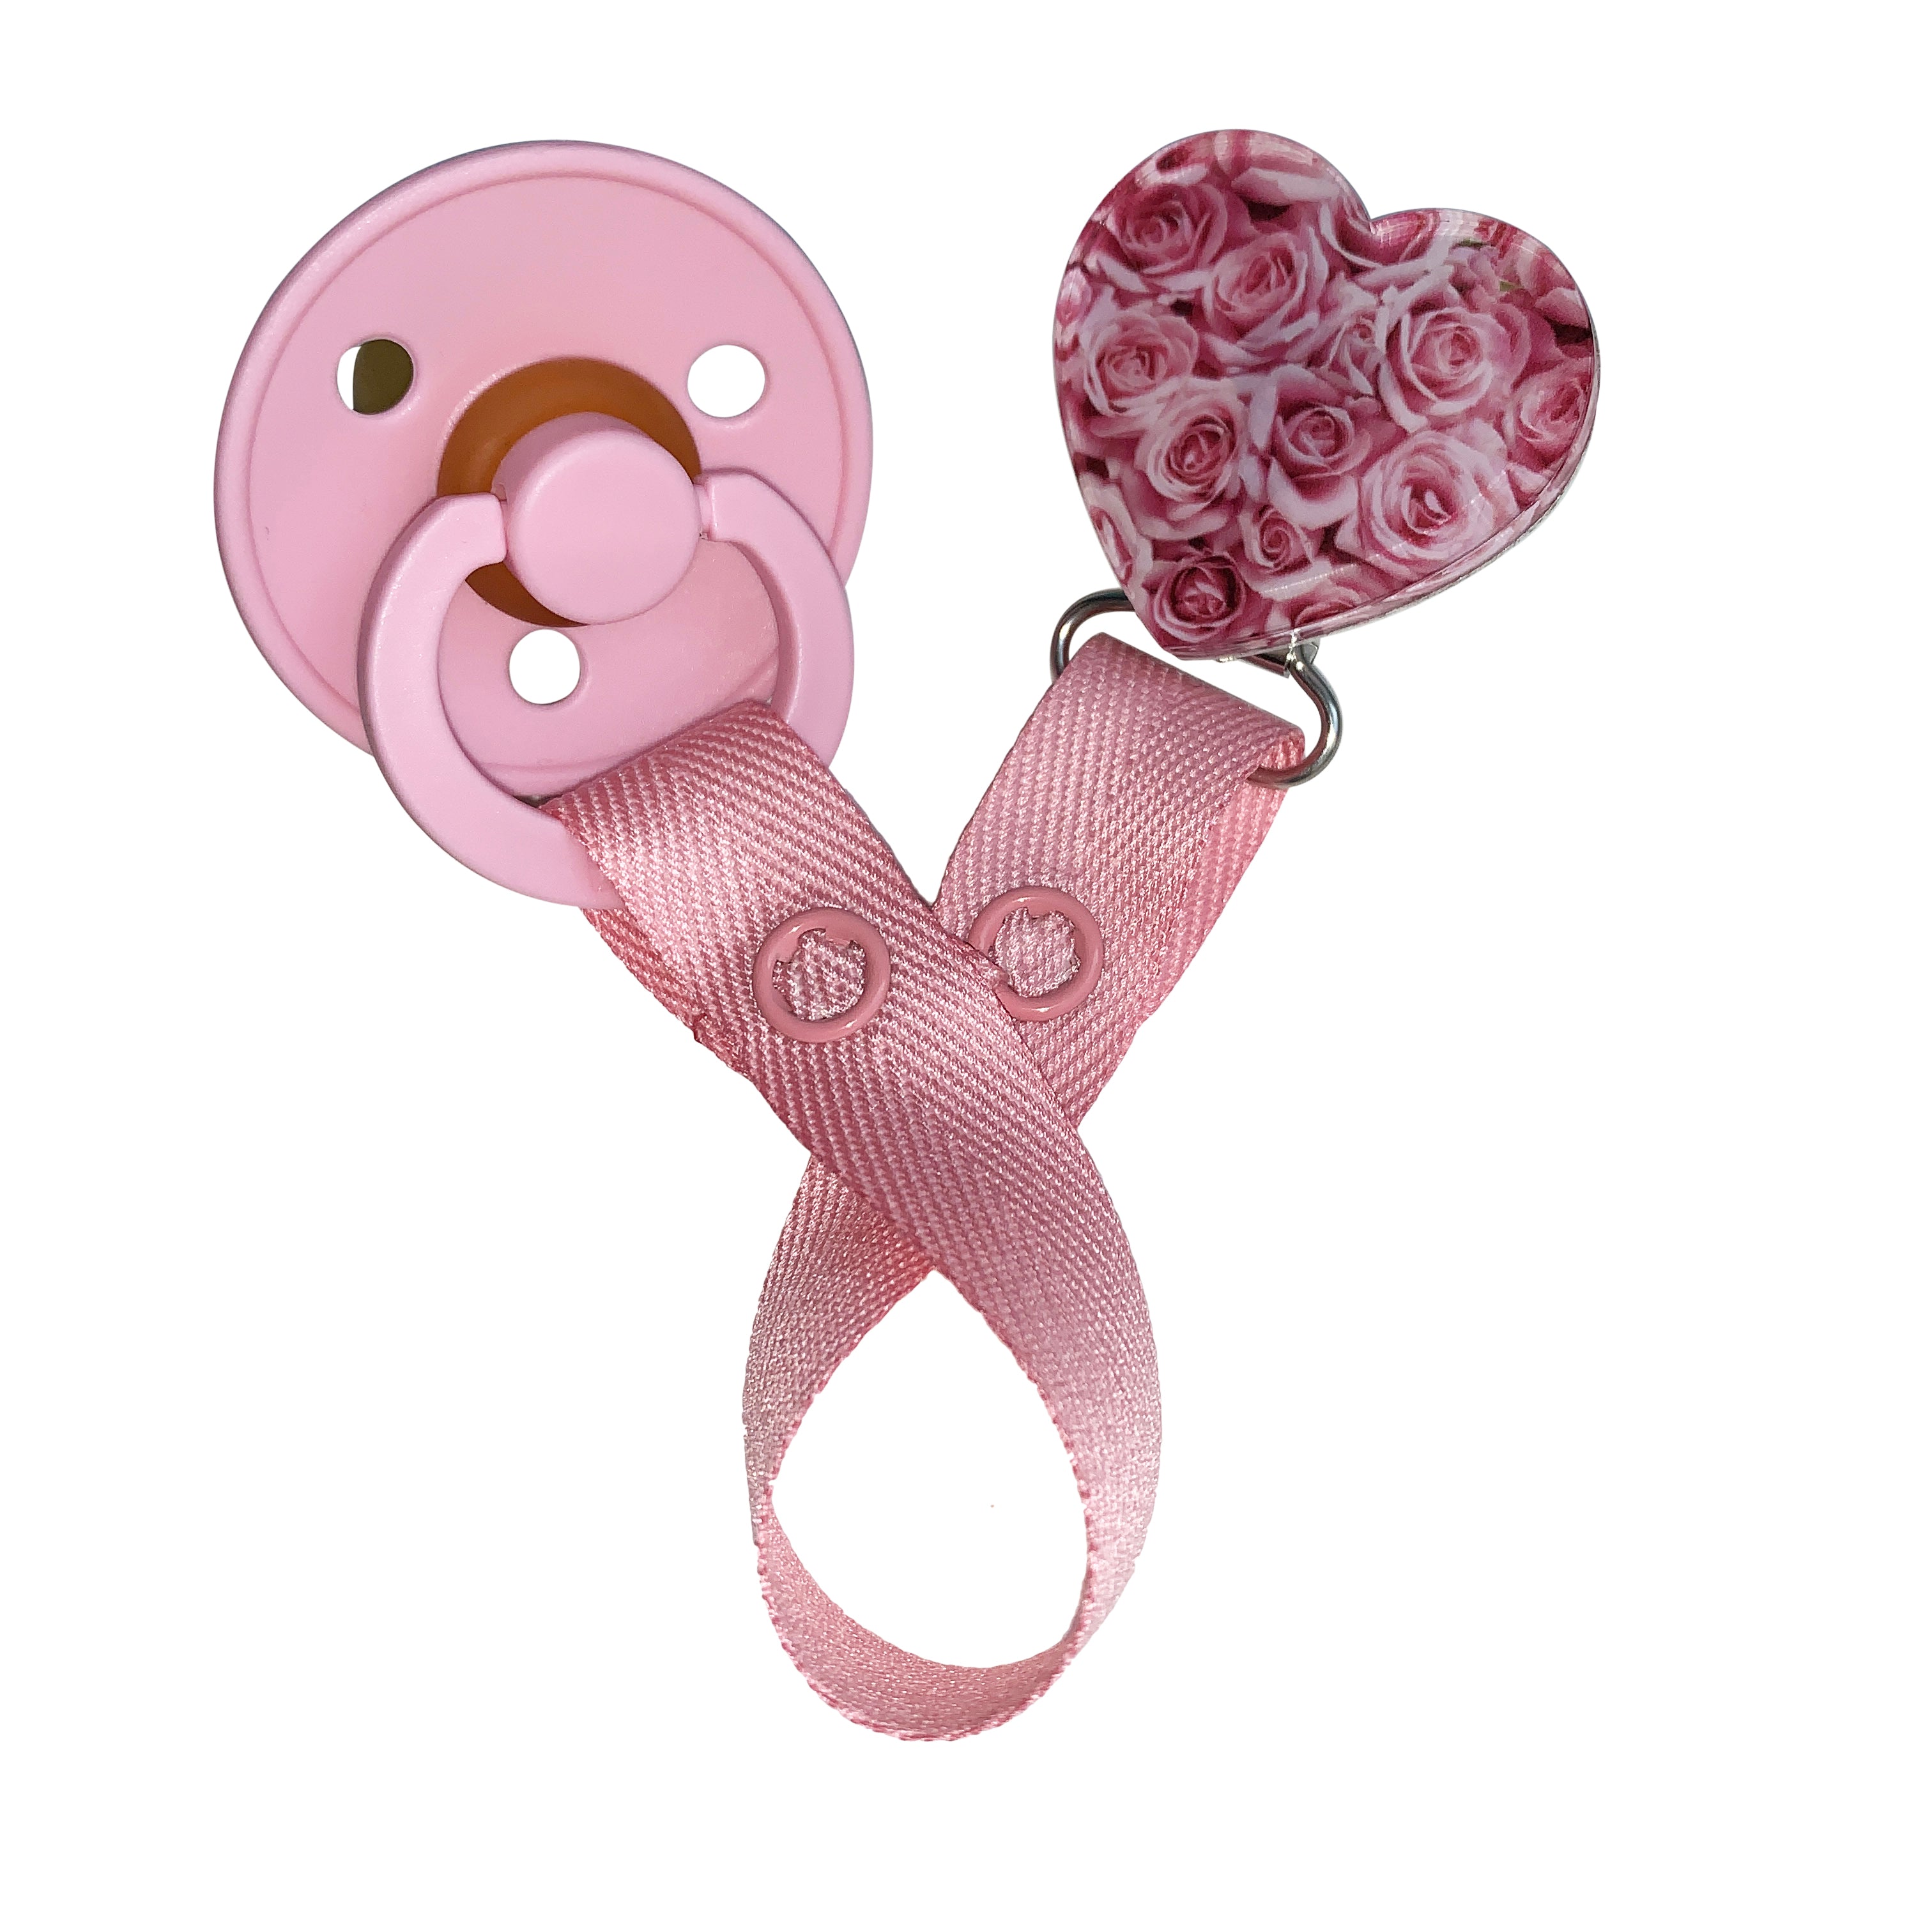 Classy Paci hues of pink roses heart clip with BIBS pacifier GIFT SET